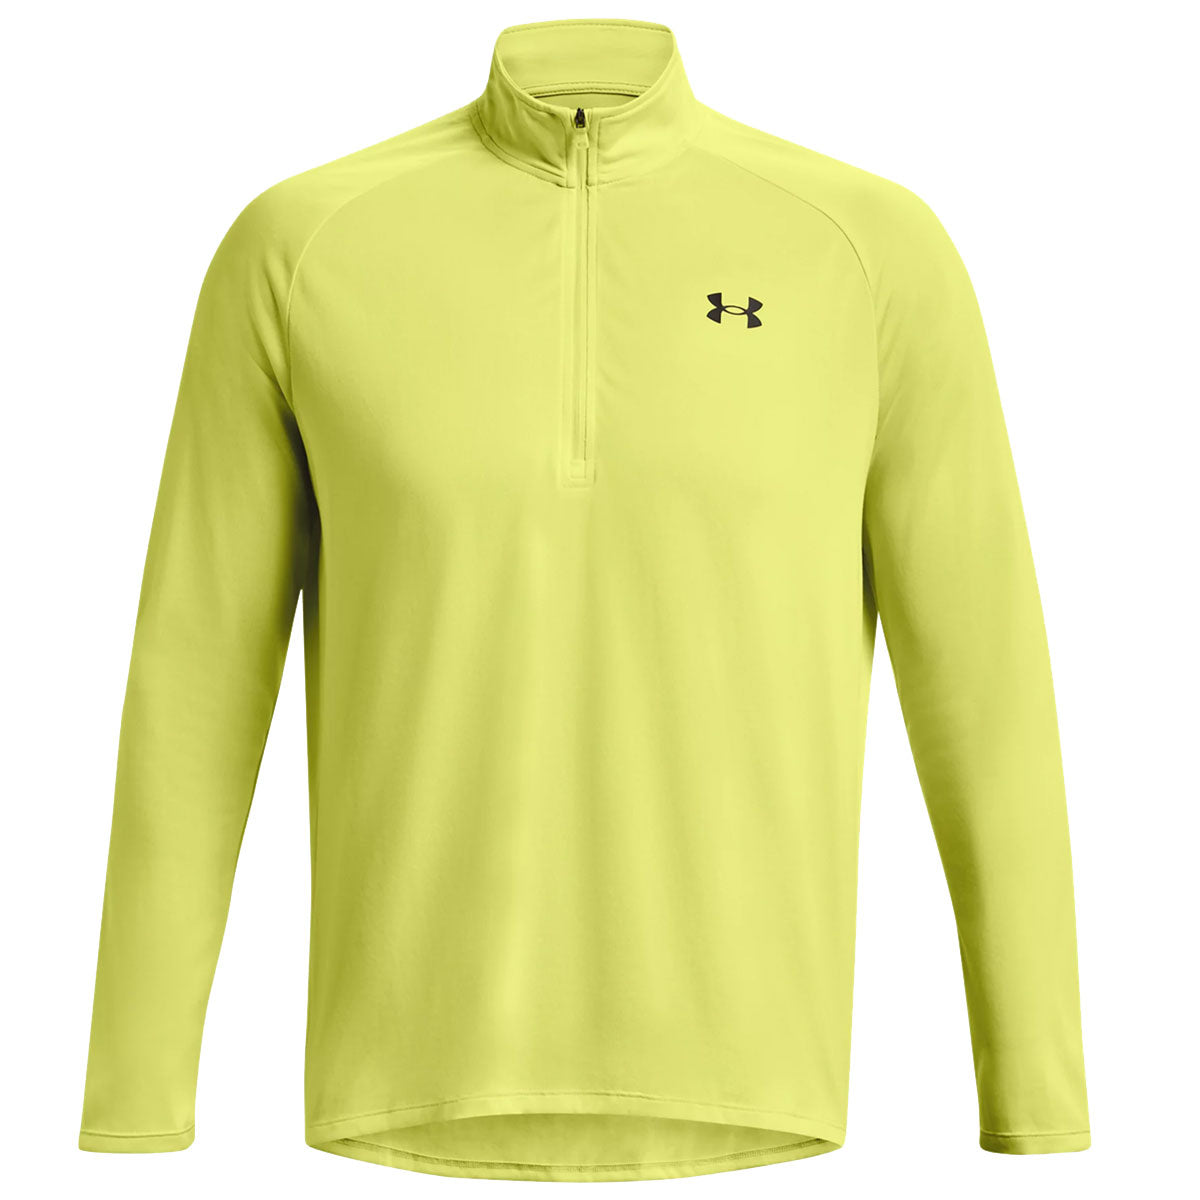 Under Armour Tech 1/2 Zip Training Top - Mens - Lime Yellow/Black